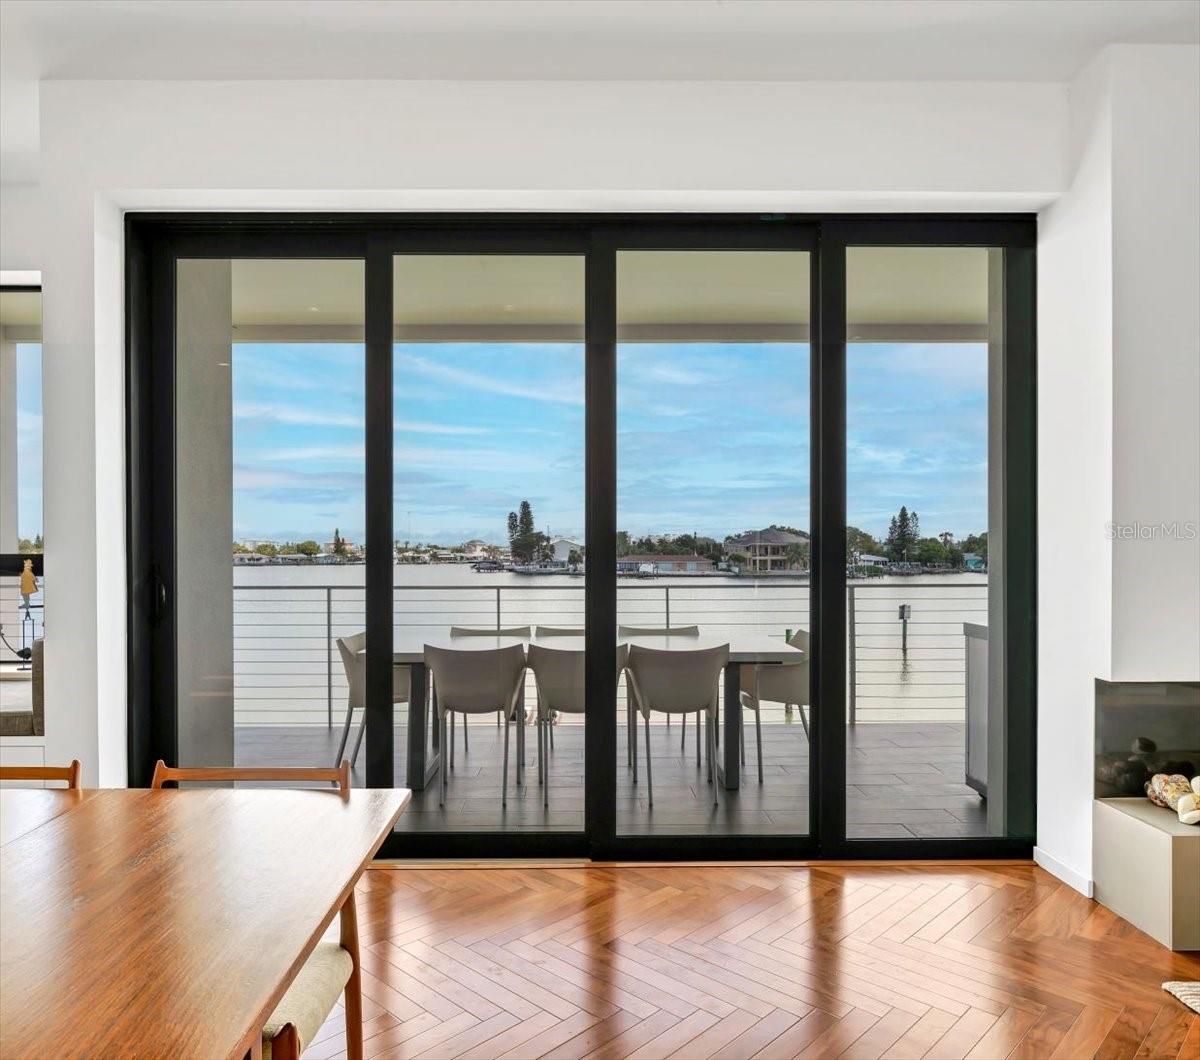 Pocketing sliding glass doors provide a view of the open covered deck and its outdoor dining space